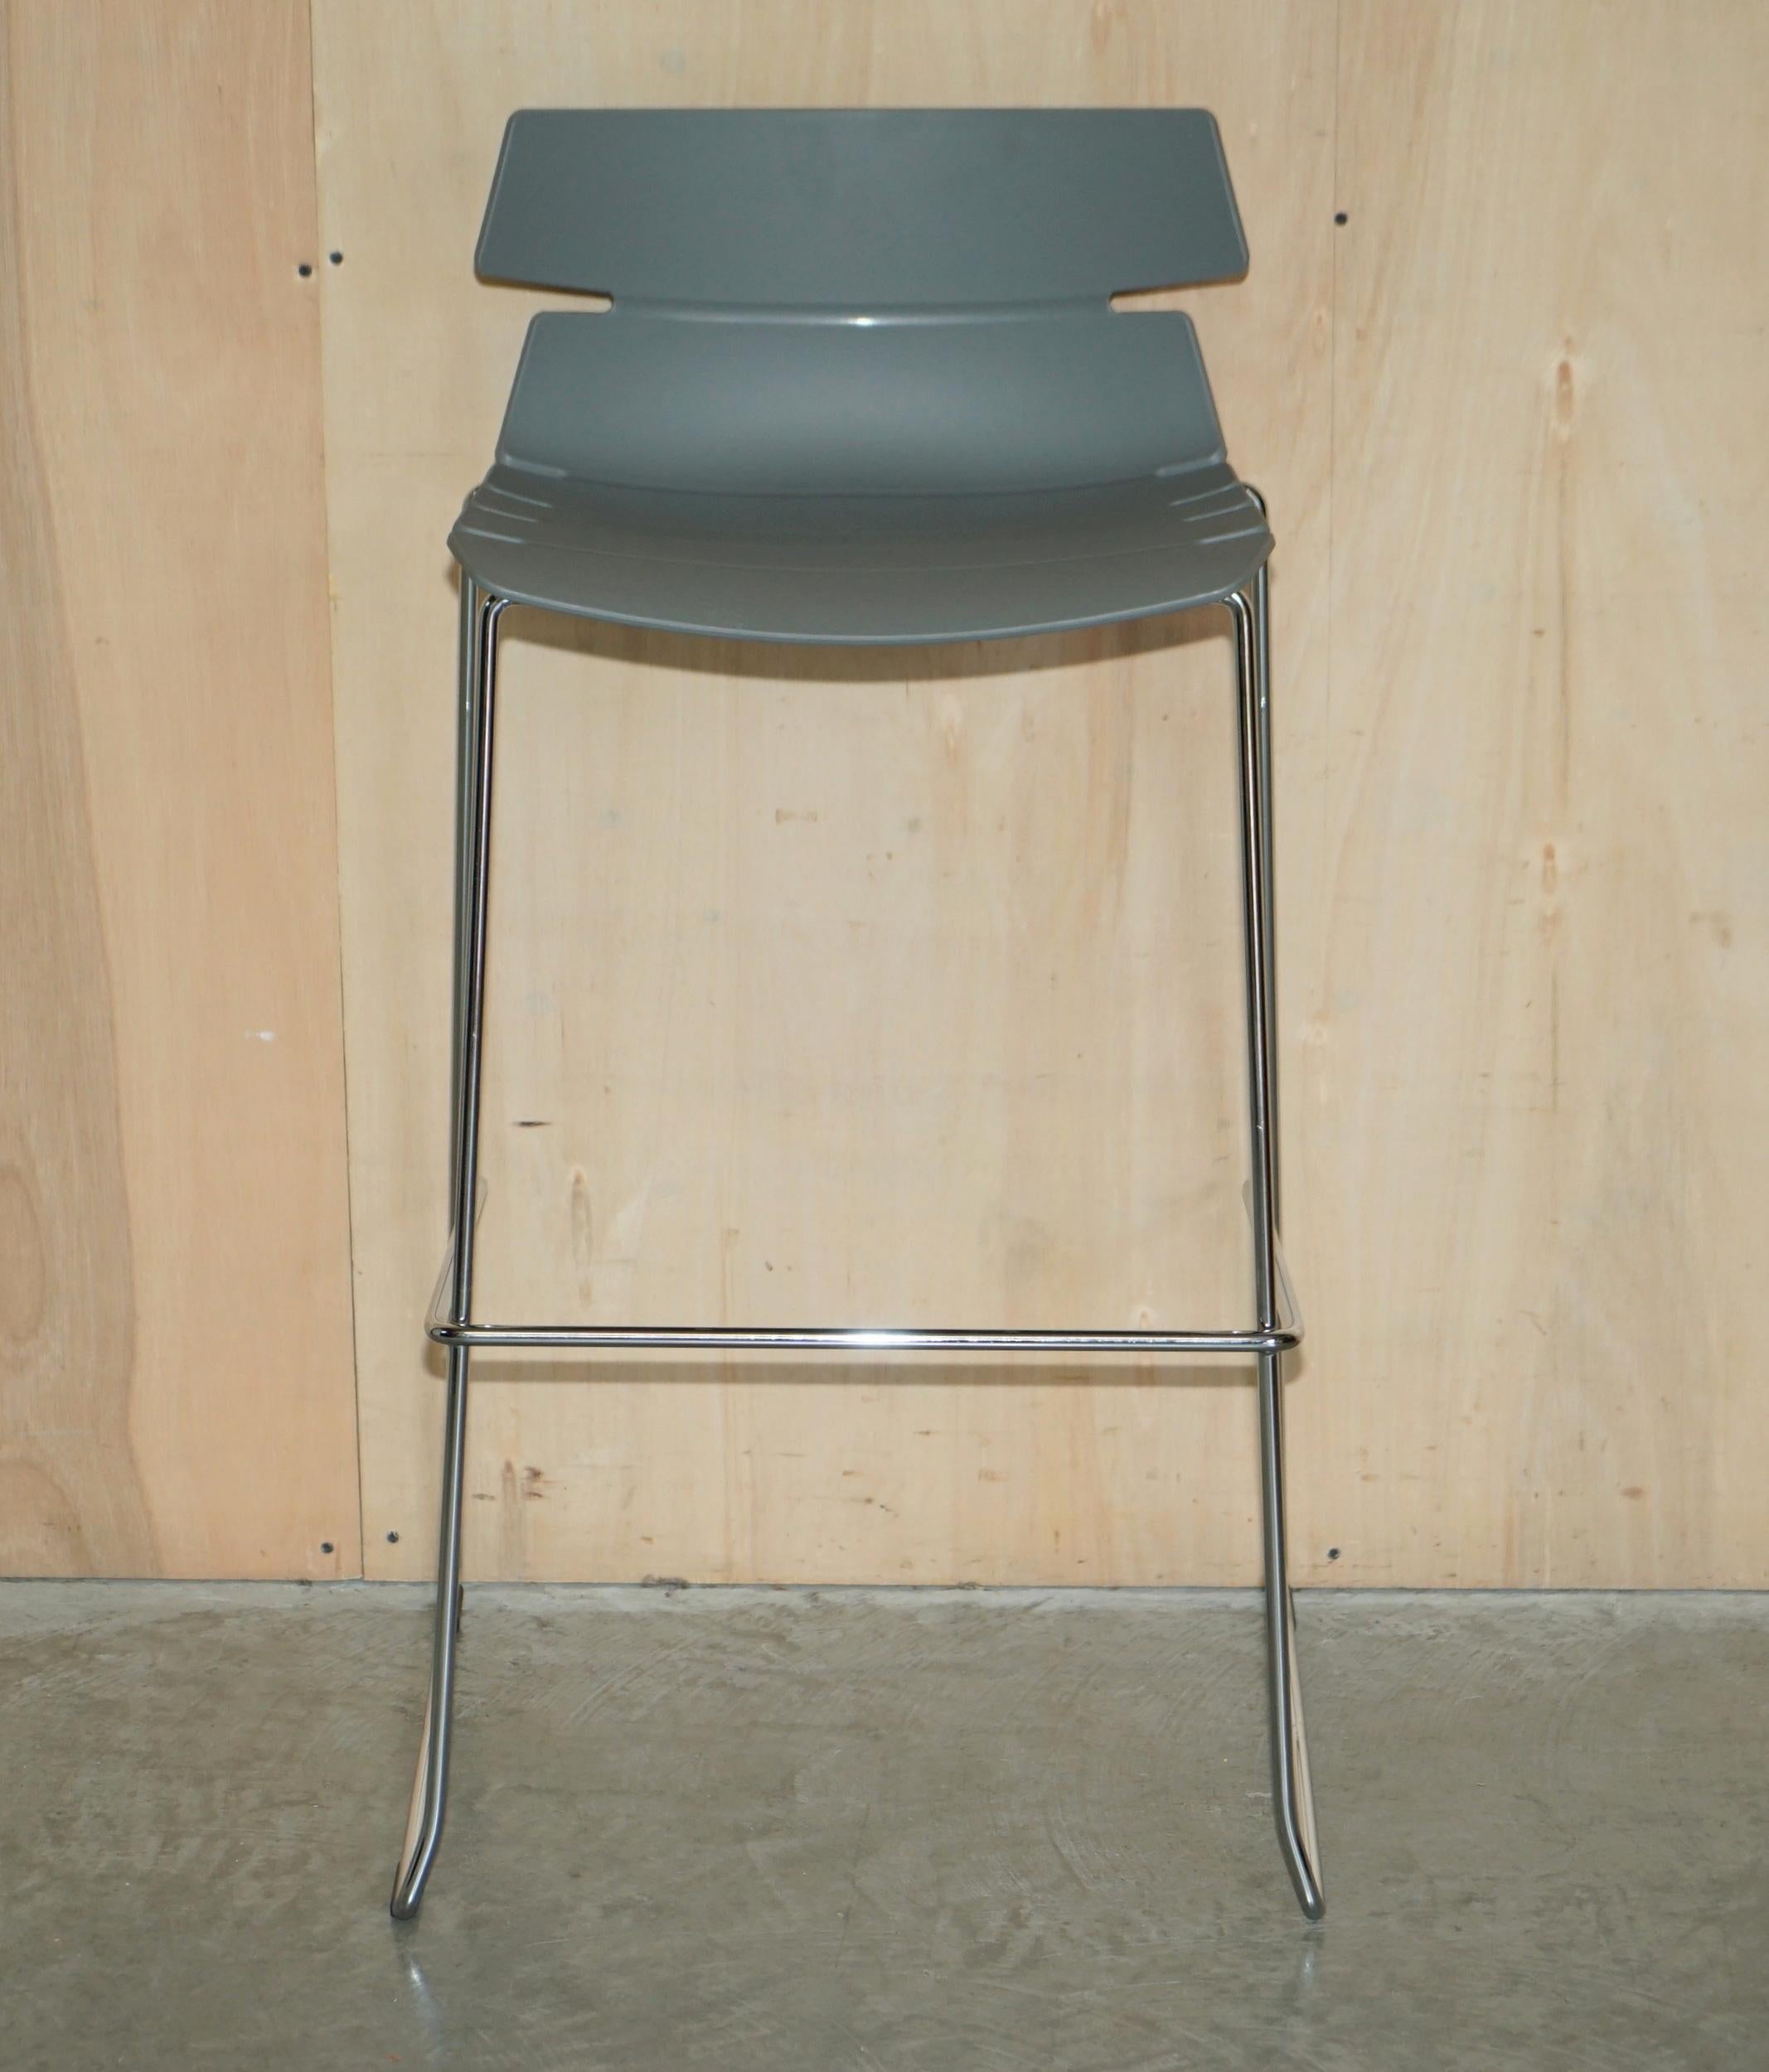 We are delighted to offer for sale this lovely unique suite of four Whiteleaf furniture LTD grey stacking bar stools which are part of a suite
I have eight of these stools in total, four grey and four black, this sale is for the four grey, the